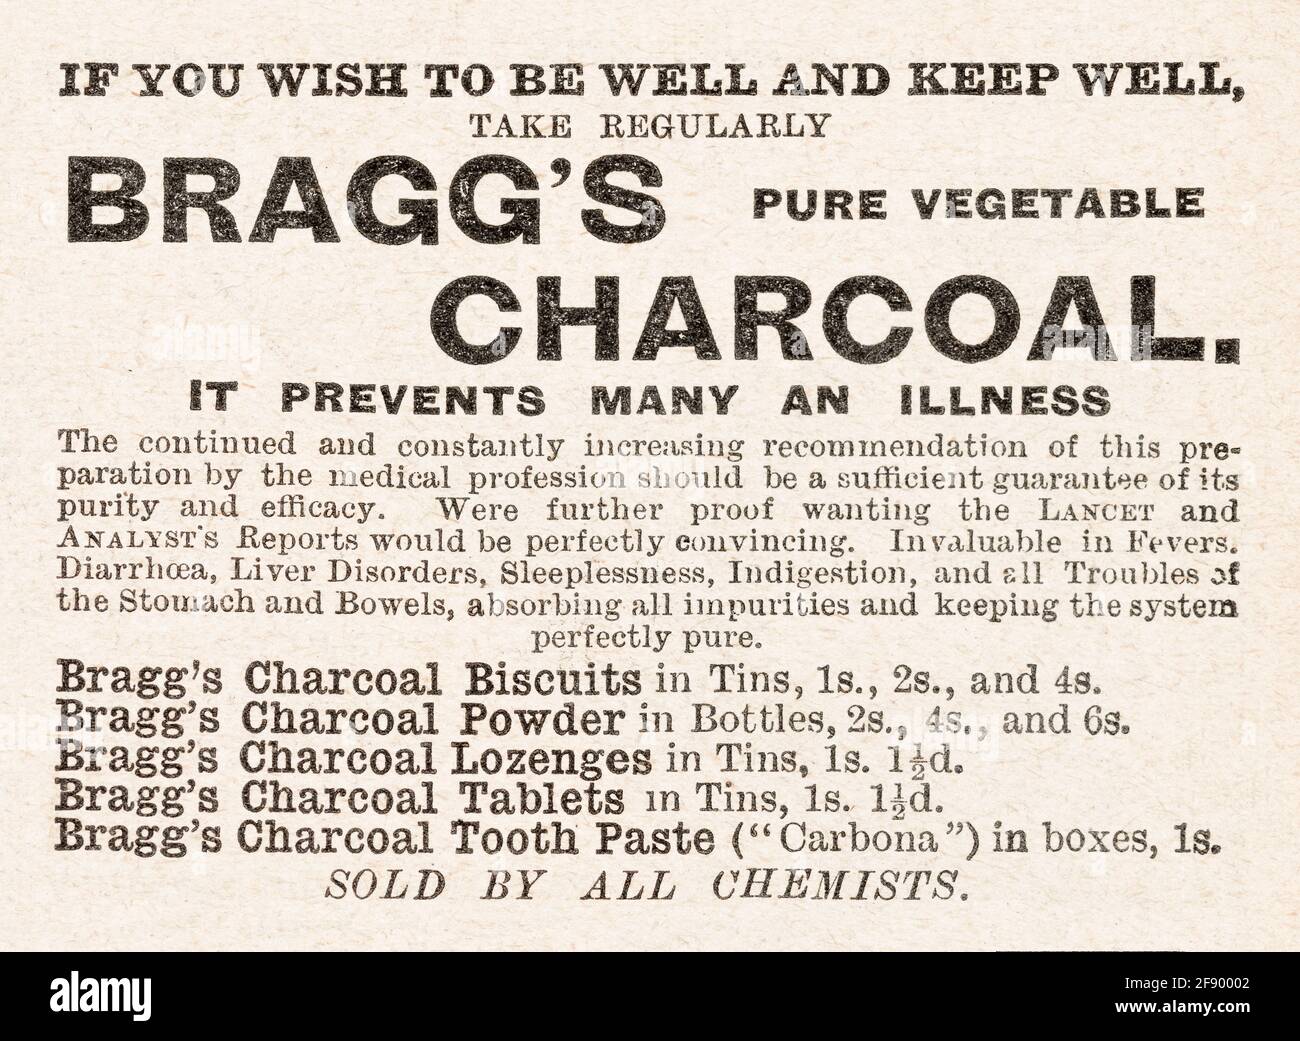 Old Bragg's Charcoal medical advert from 1902 - pre advertising standards. History of medical advertising, old healthcare adverts, snake oil cures. Stock Photo